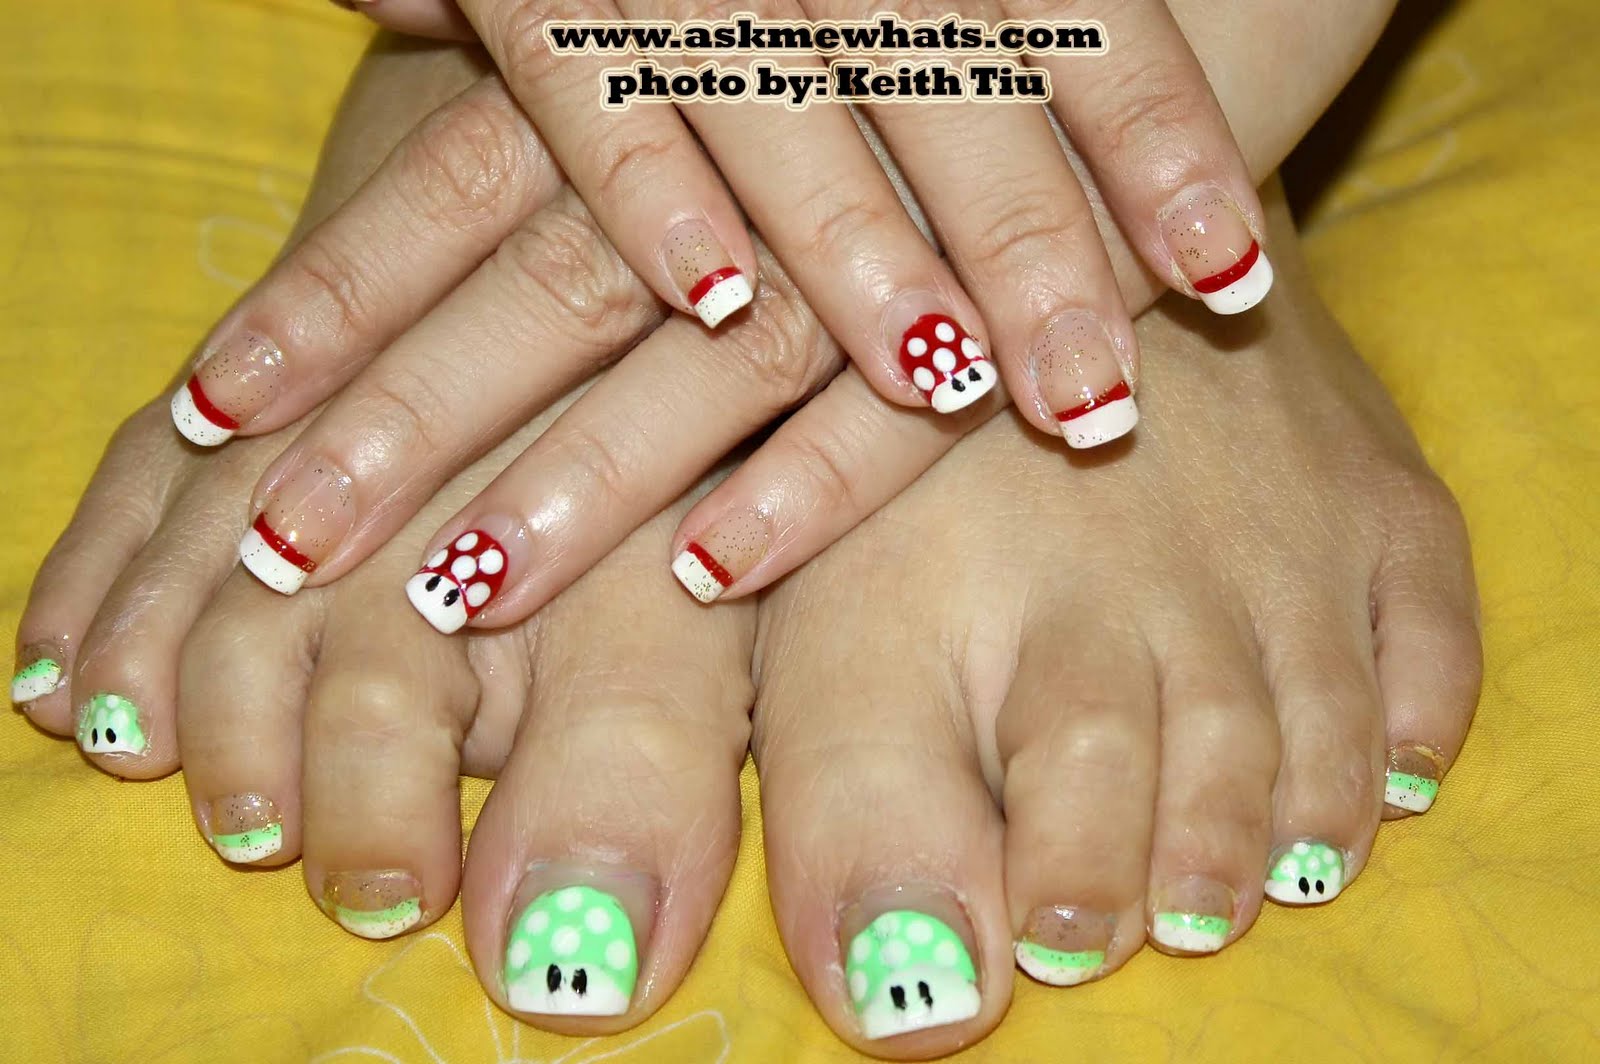 I did similar nail art on my toes using green! One Up! :)